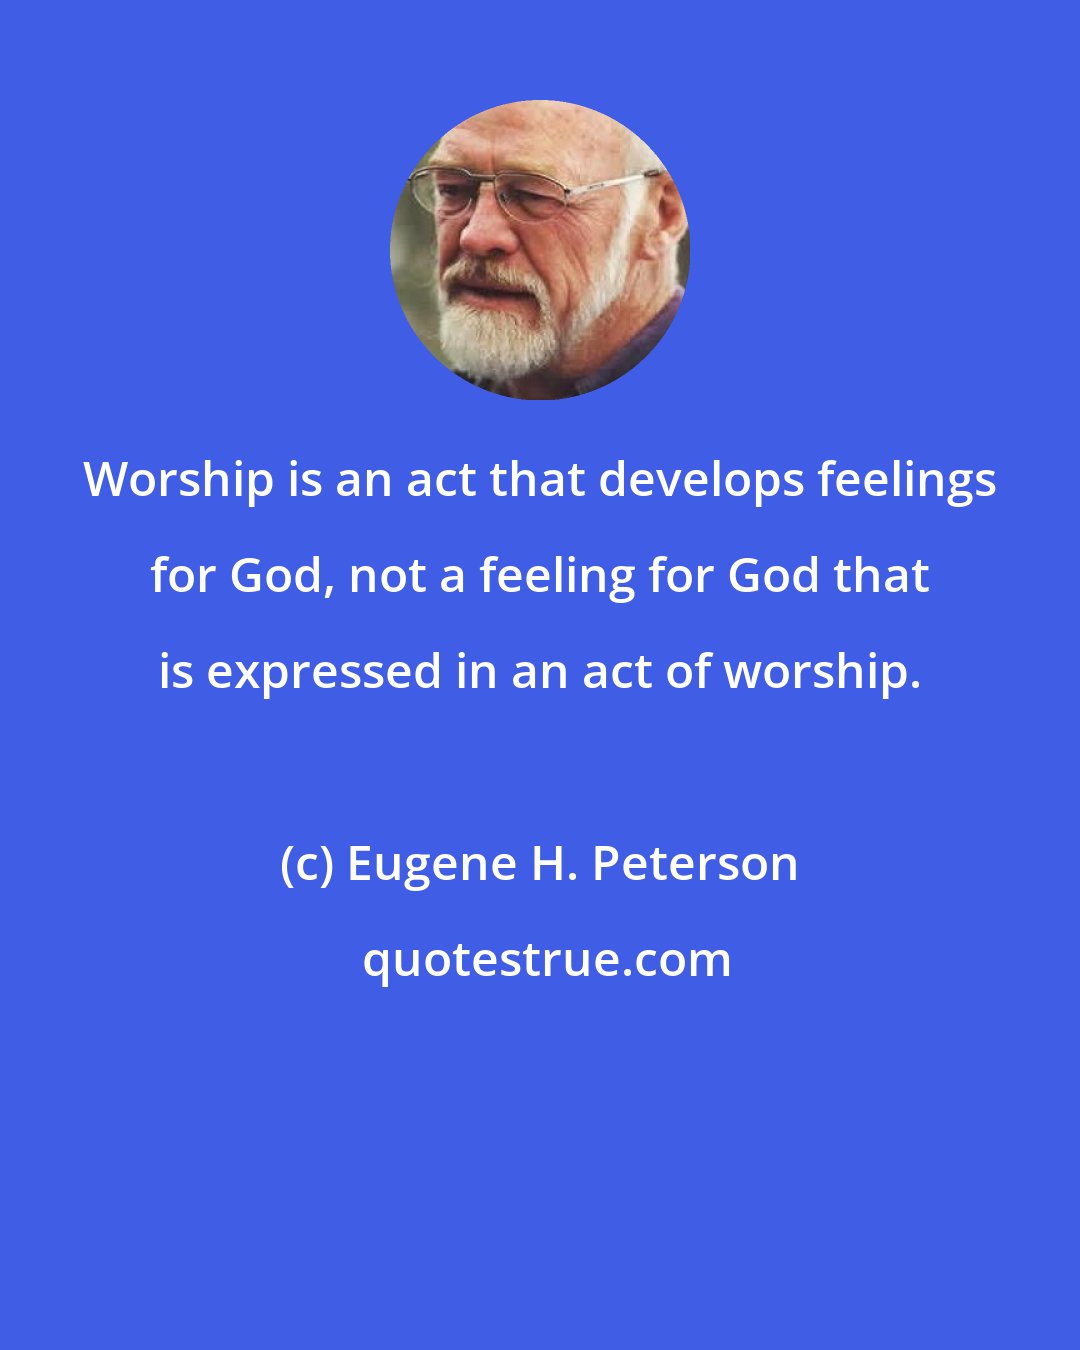 Eugene H. Peterson: Worship is an act that develops feelings for God, not a feeling for God that is expressed in an act of worship.